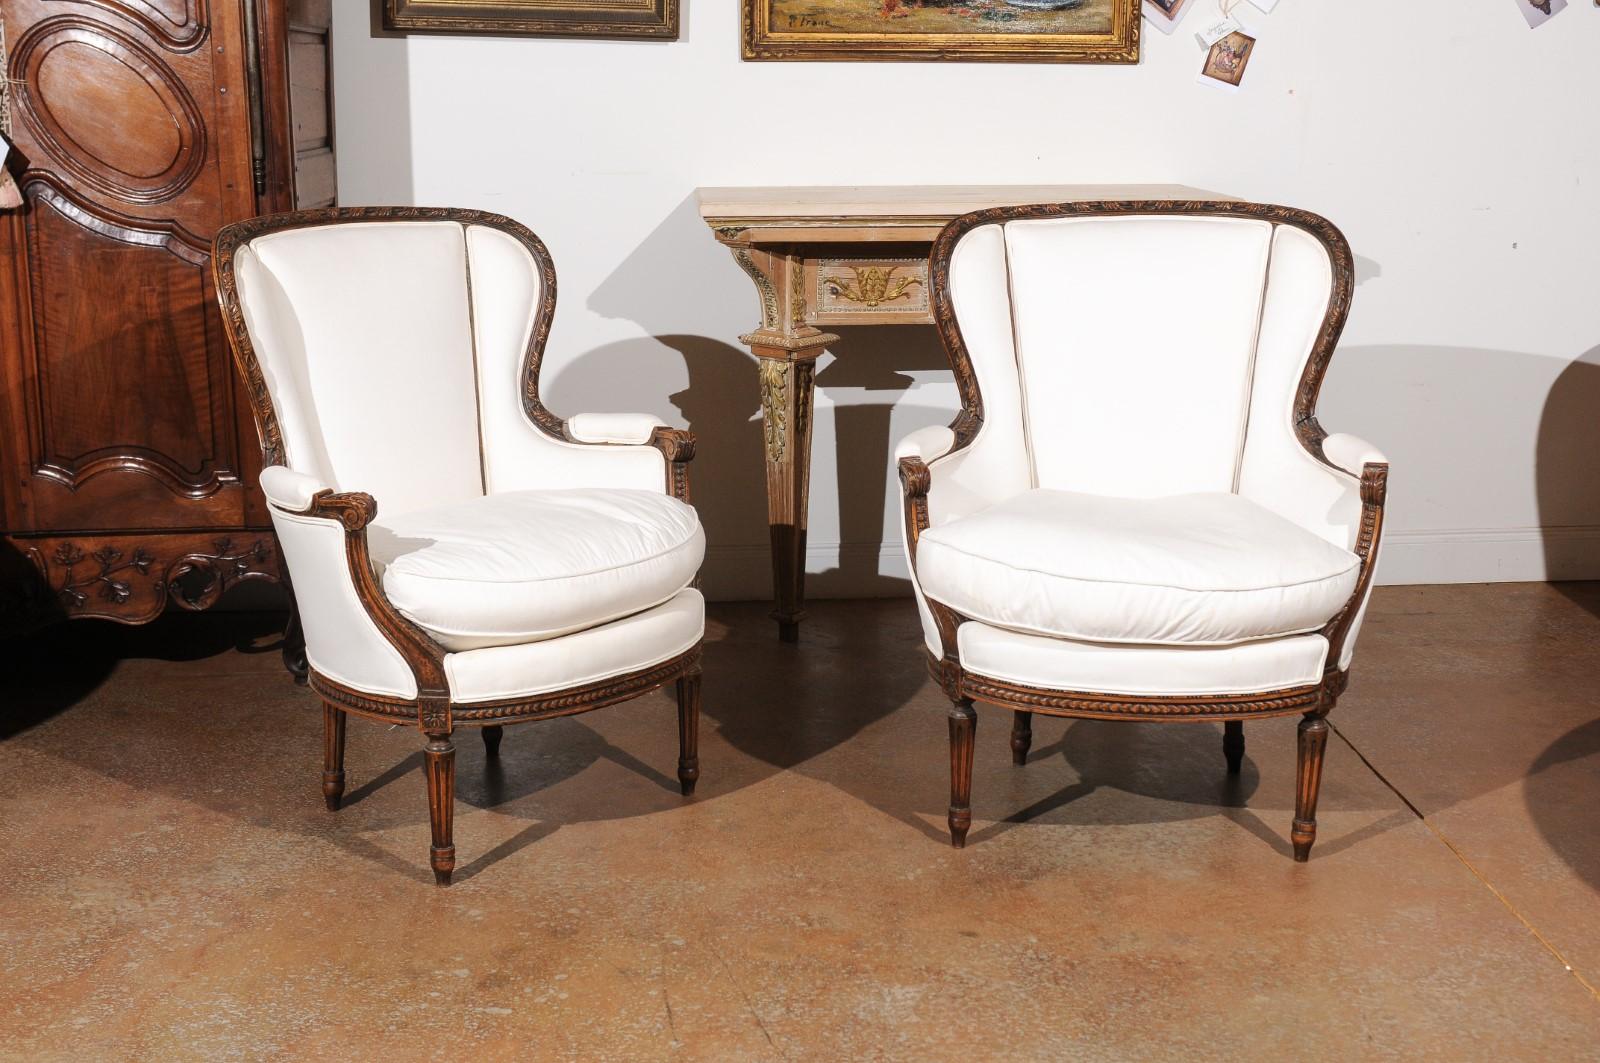 A pair of French Louis XVI style carved walnut bergères from the 19th century, with fan-shaped wingbacks and new upholstery. Born in France during the politically dynamic 19th century, each of this pair of bergère chair features a fan-shaped